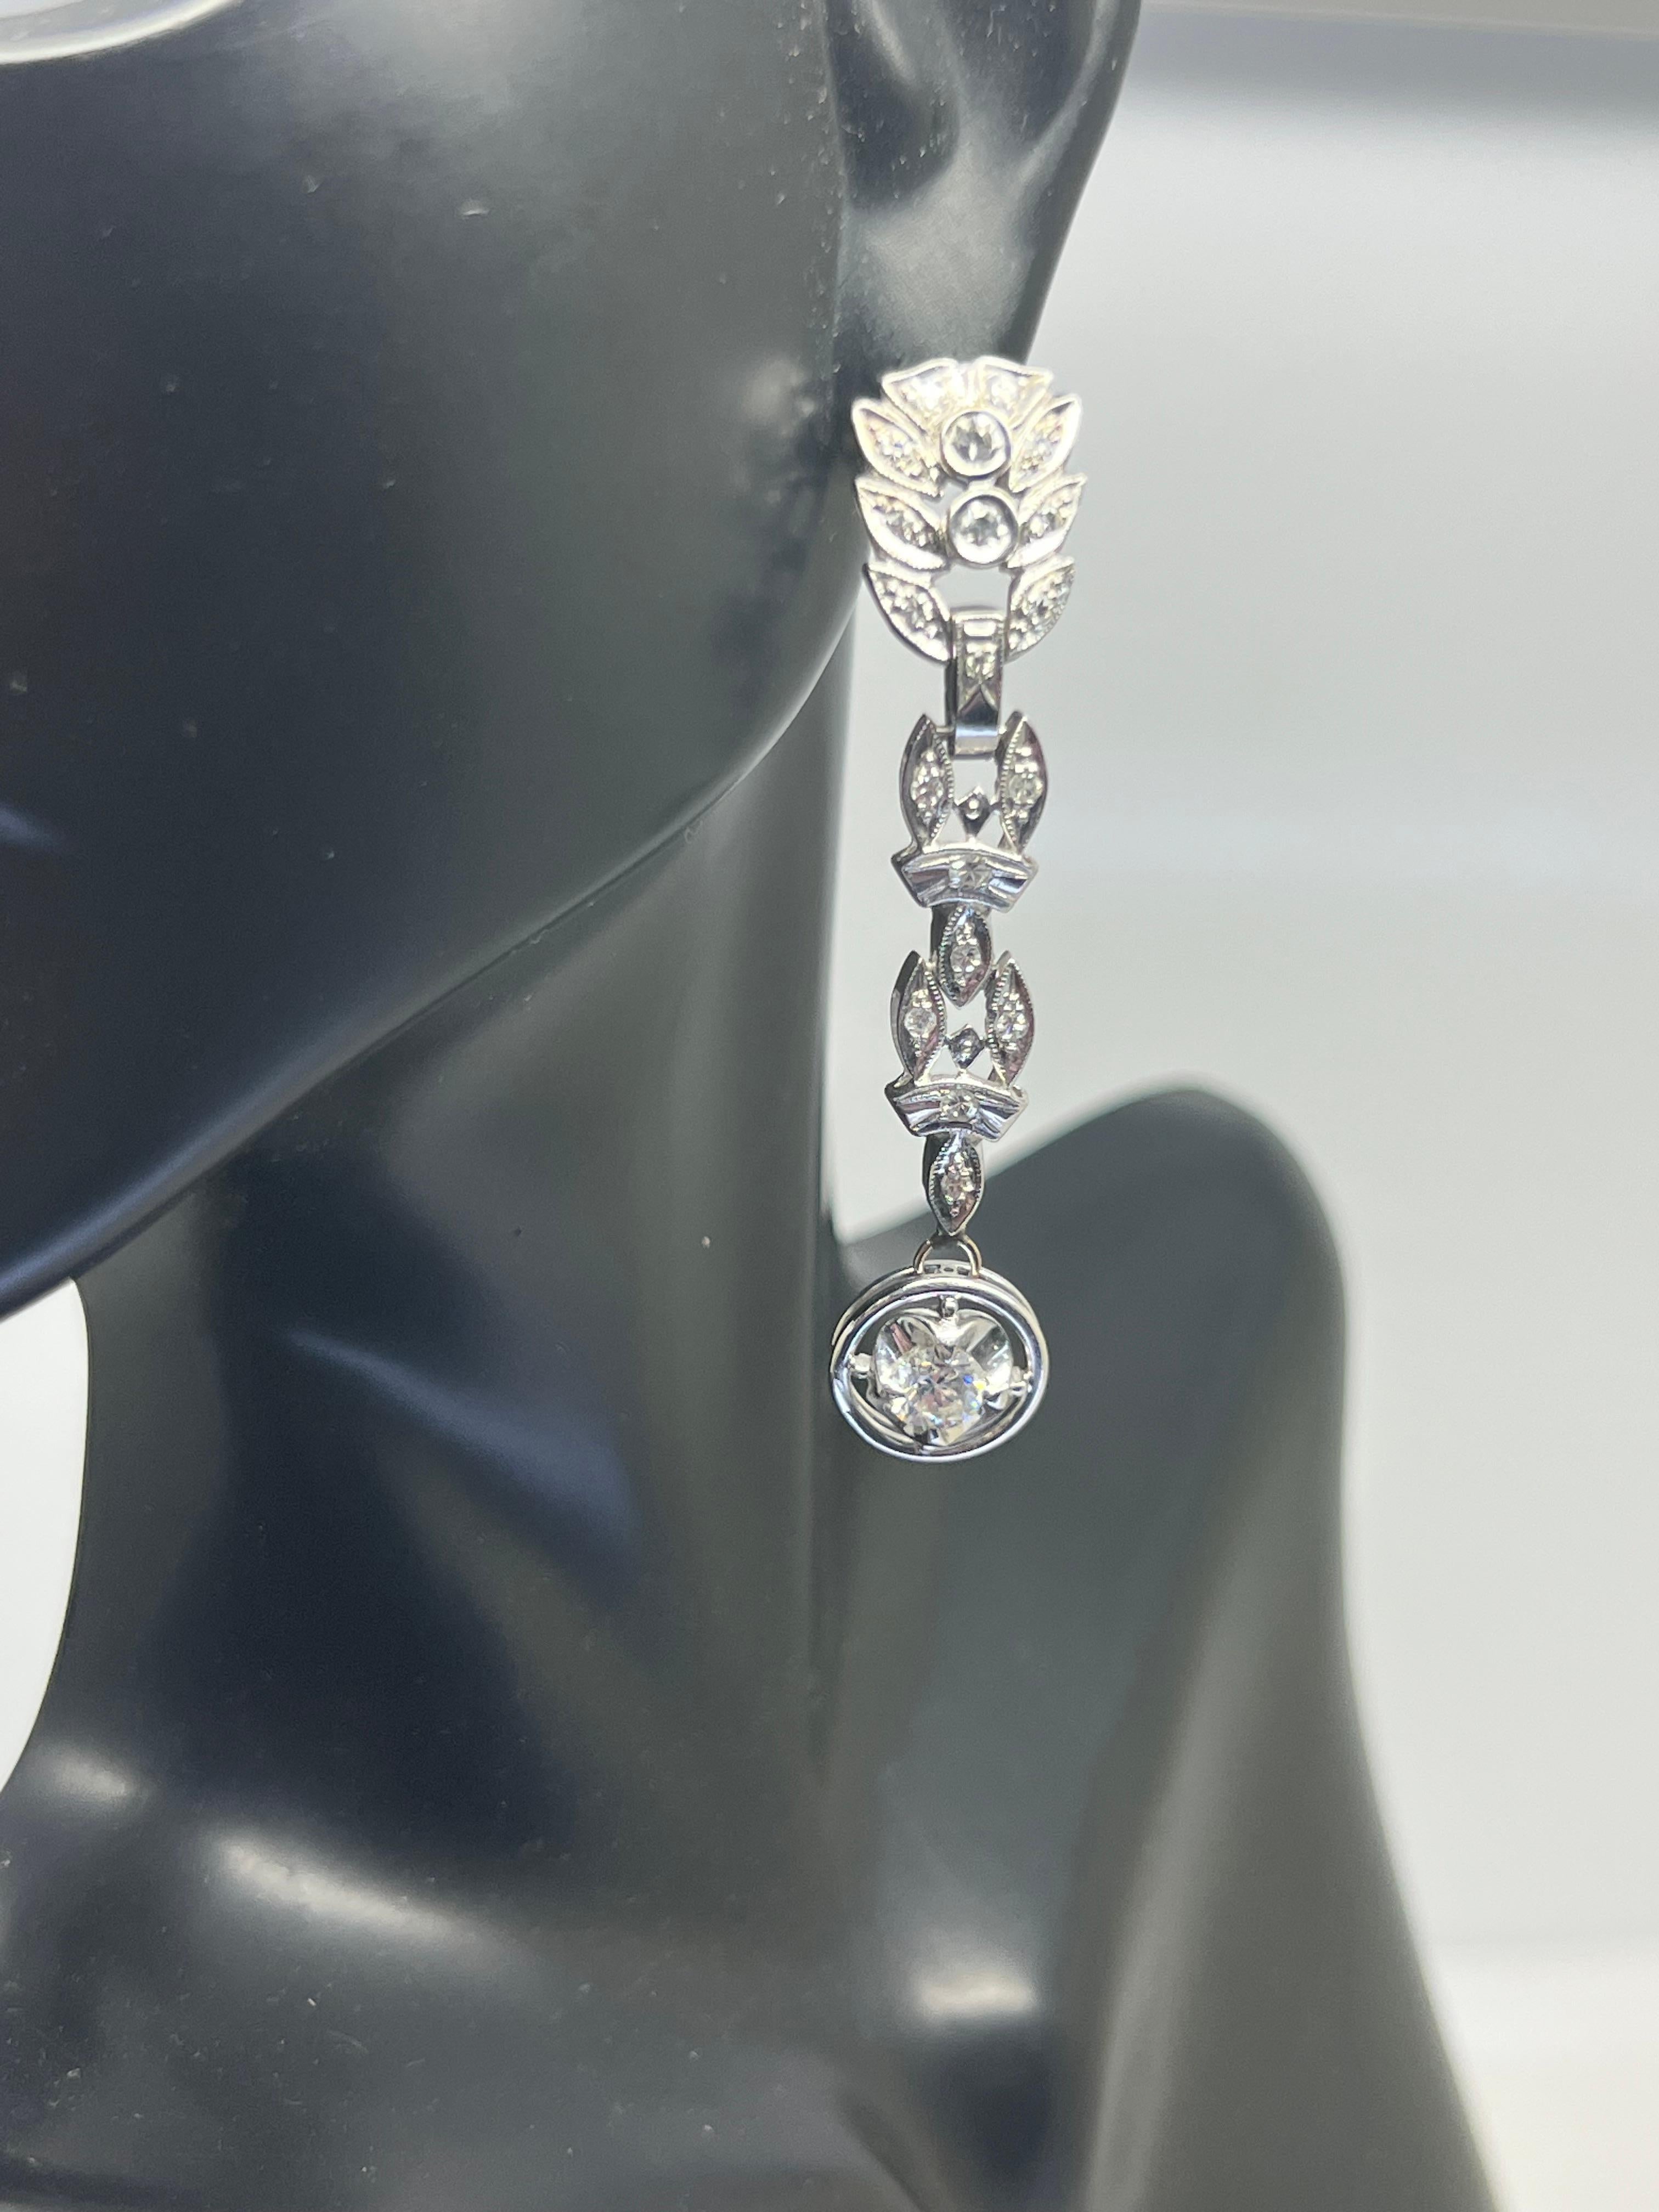 Elevate your style with these stunning 14k white gold leaf-shaped earrings featuring natural round diamonds with a total carat weight of 1.17. The intricate prong setting style showcases the white diamonds, which sparkle beautifully in the light.